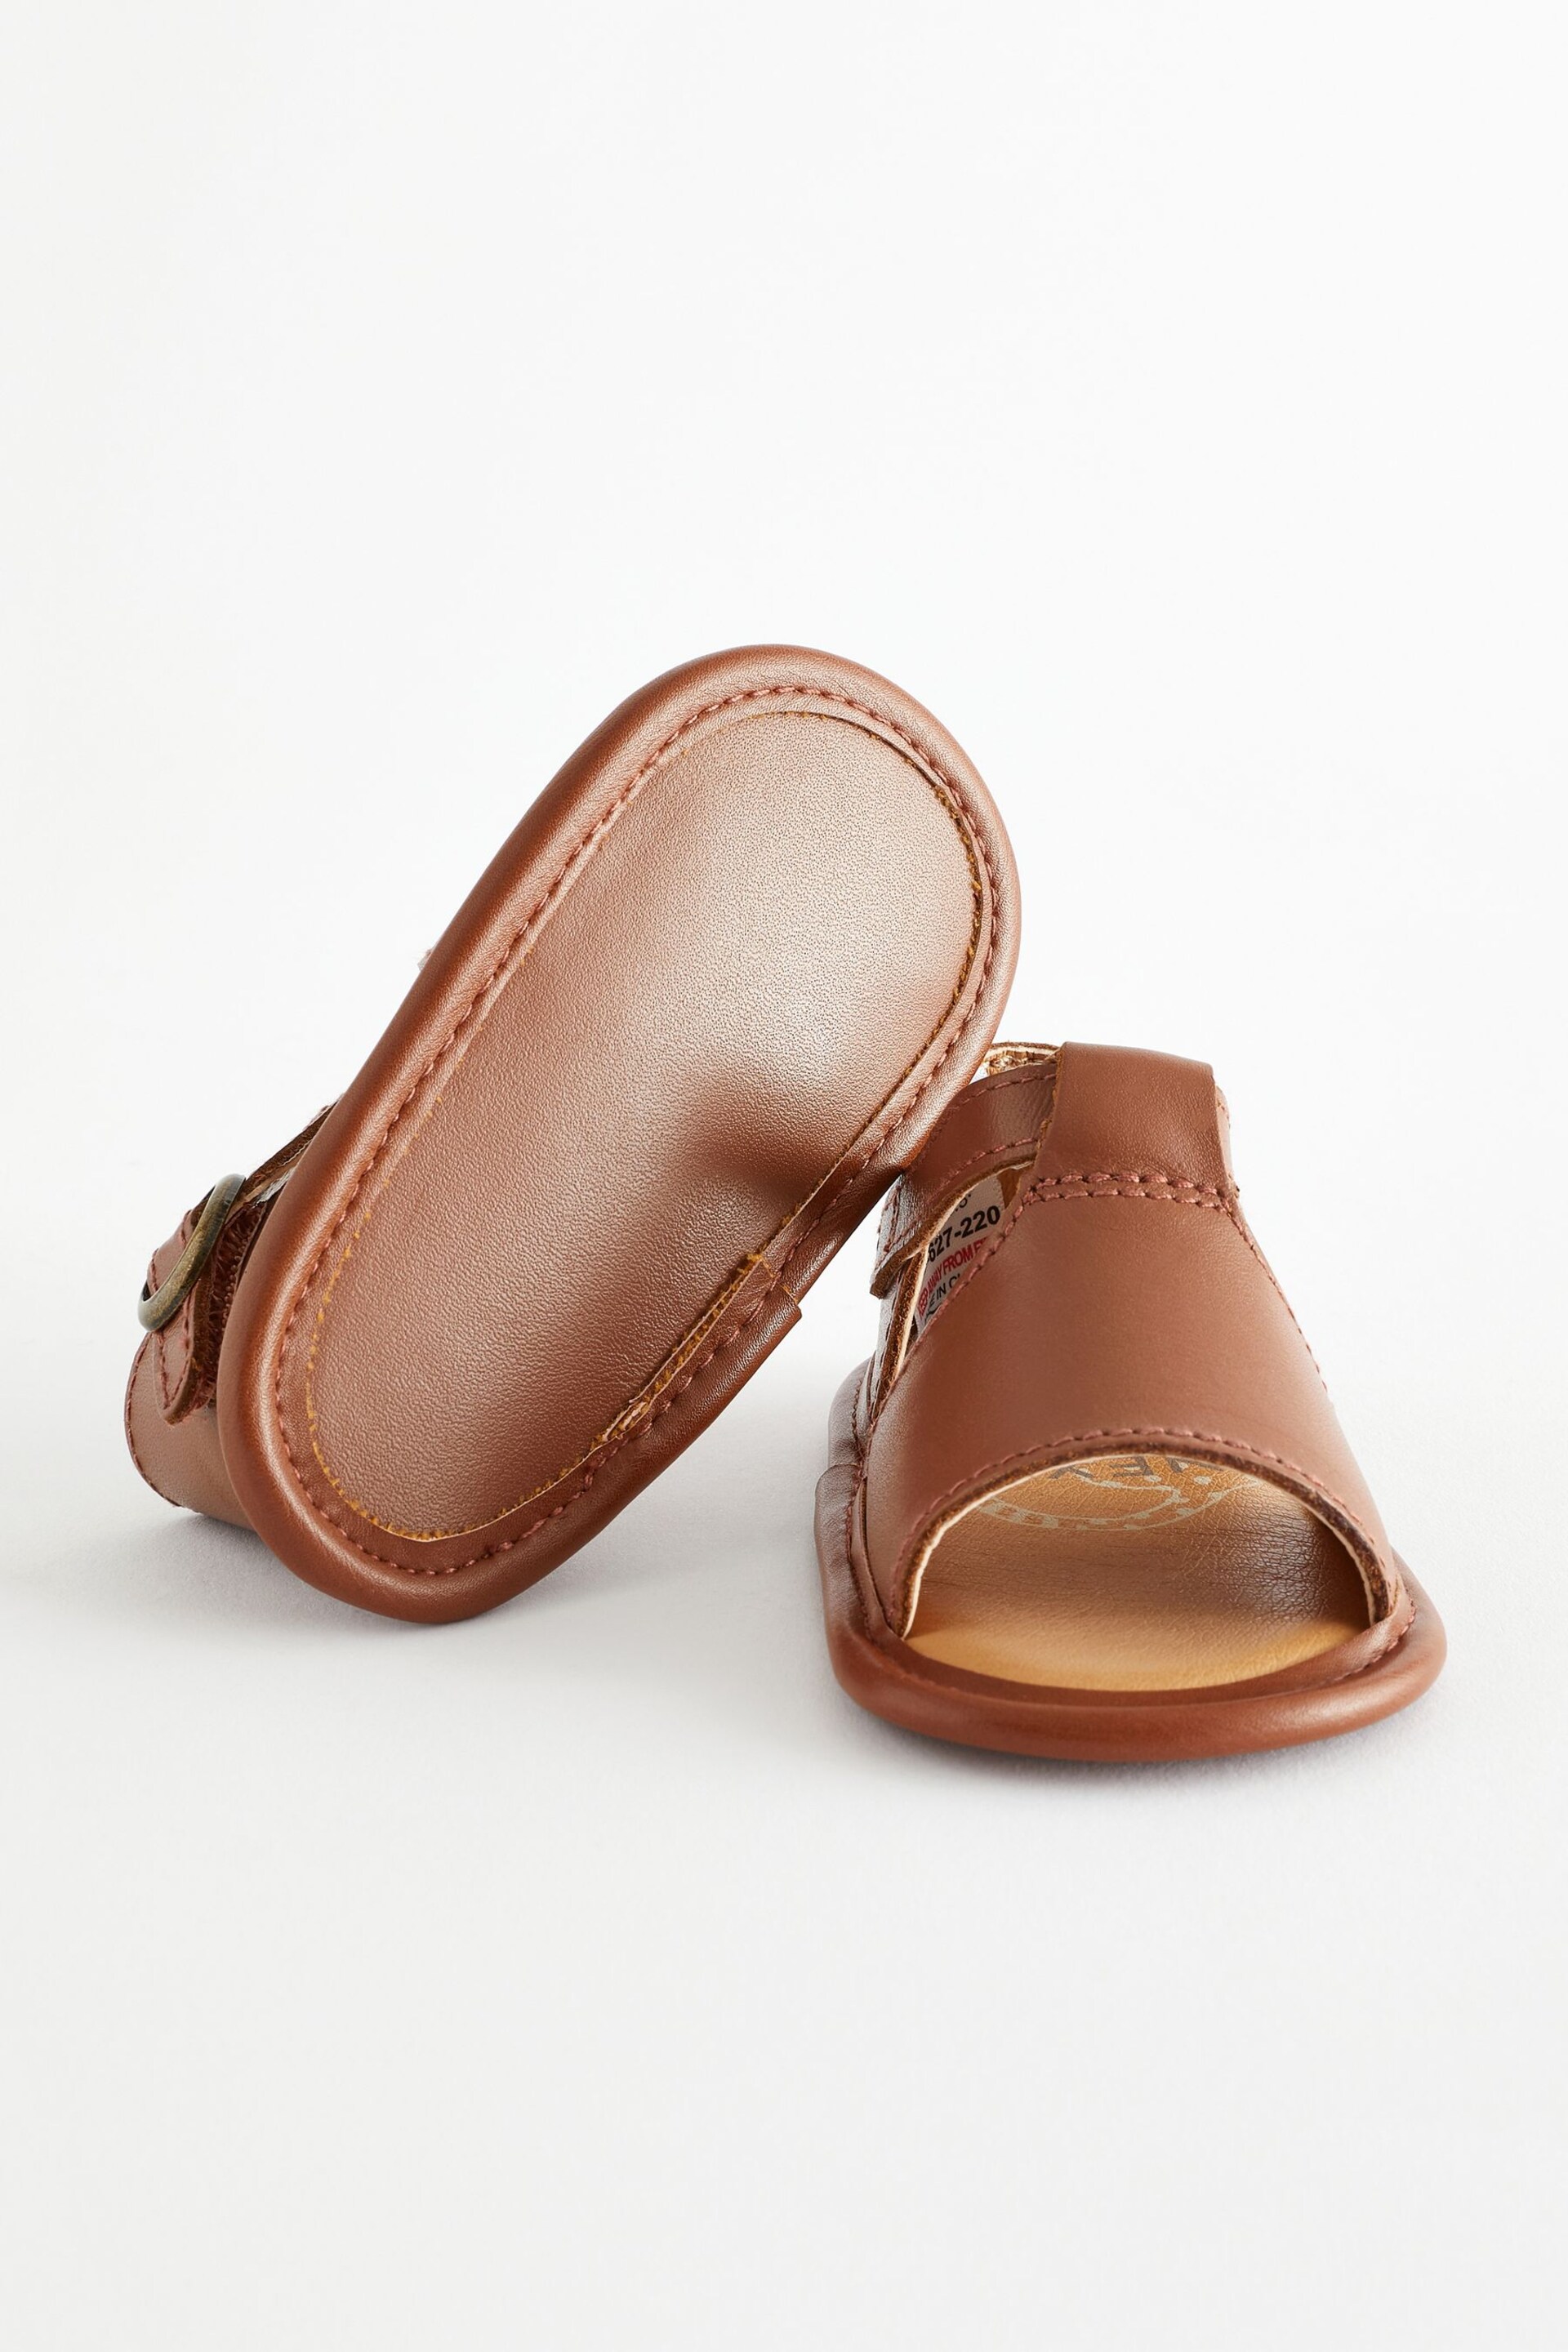 Tan Brown Leather Baby Sandals (0-24mths) - Image 4 of 6